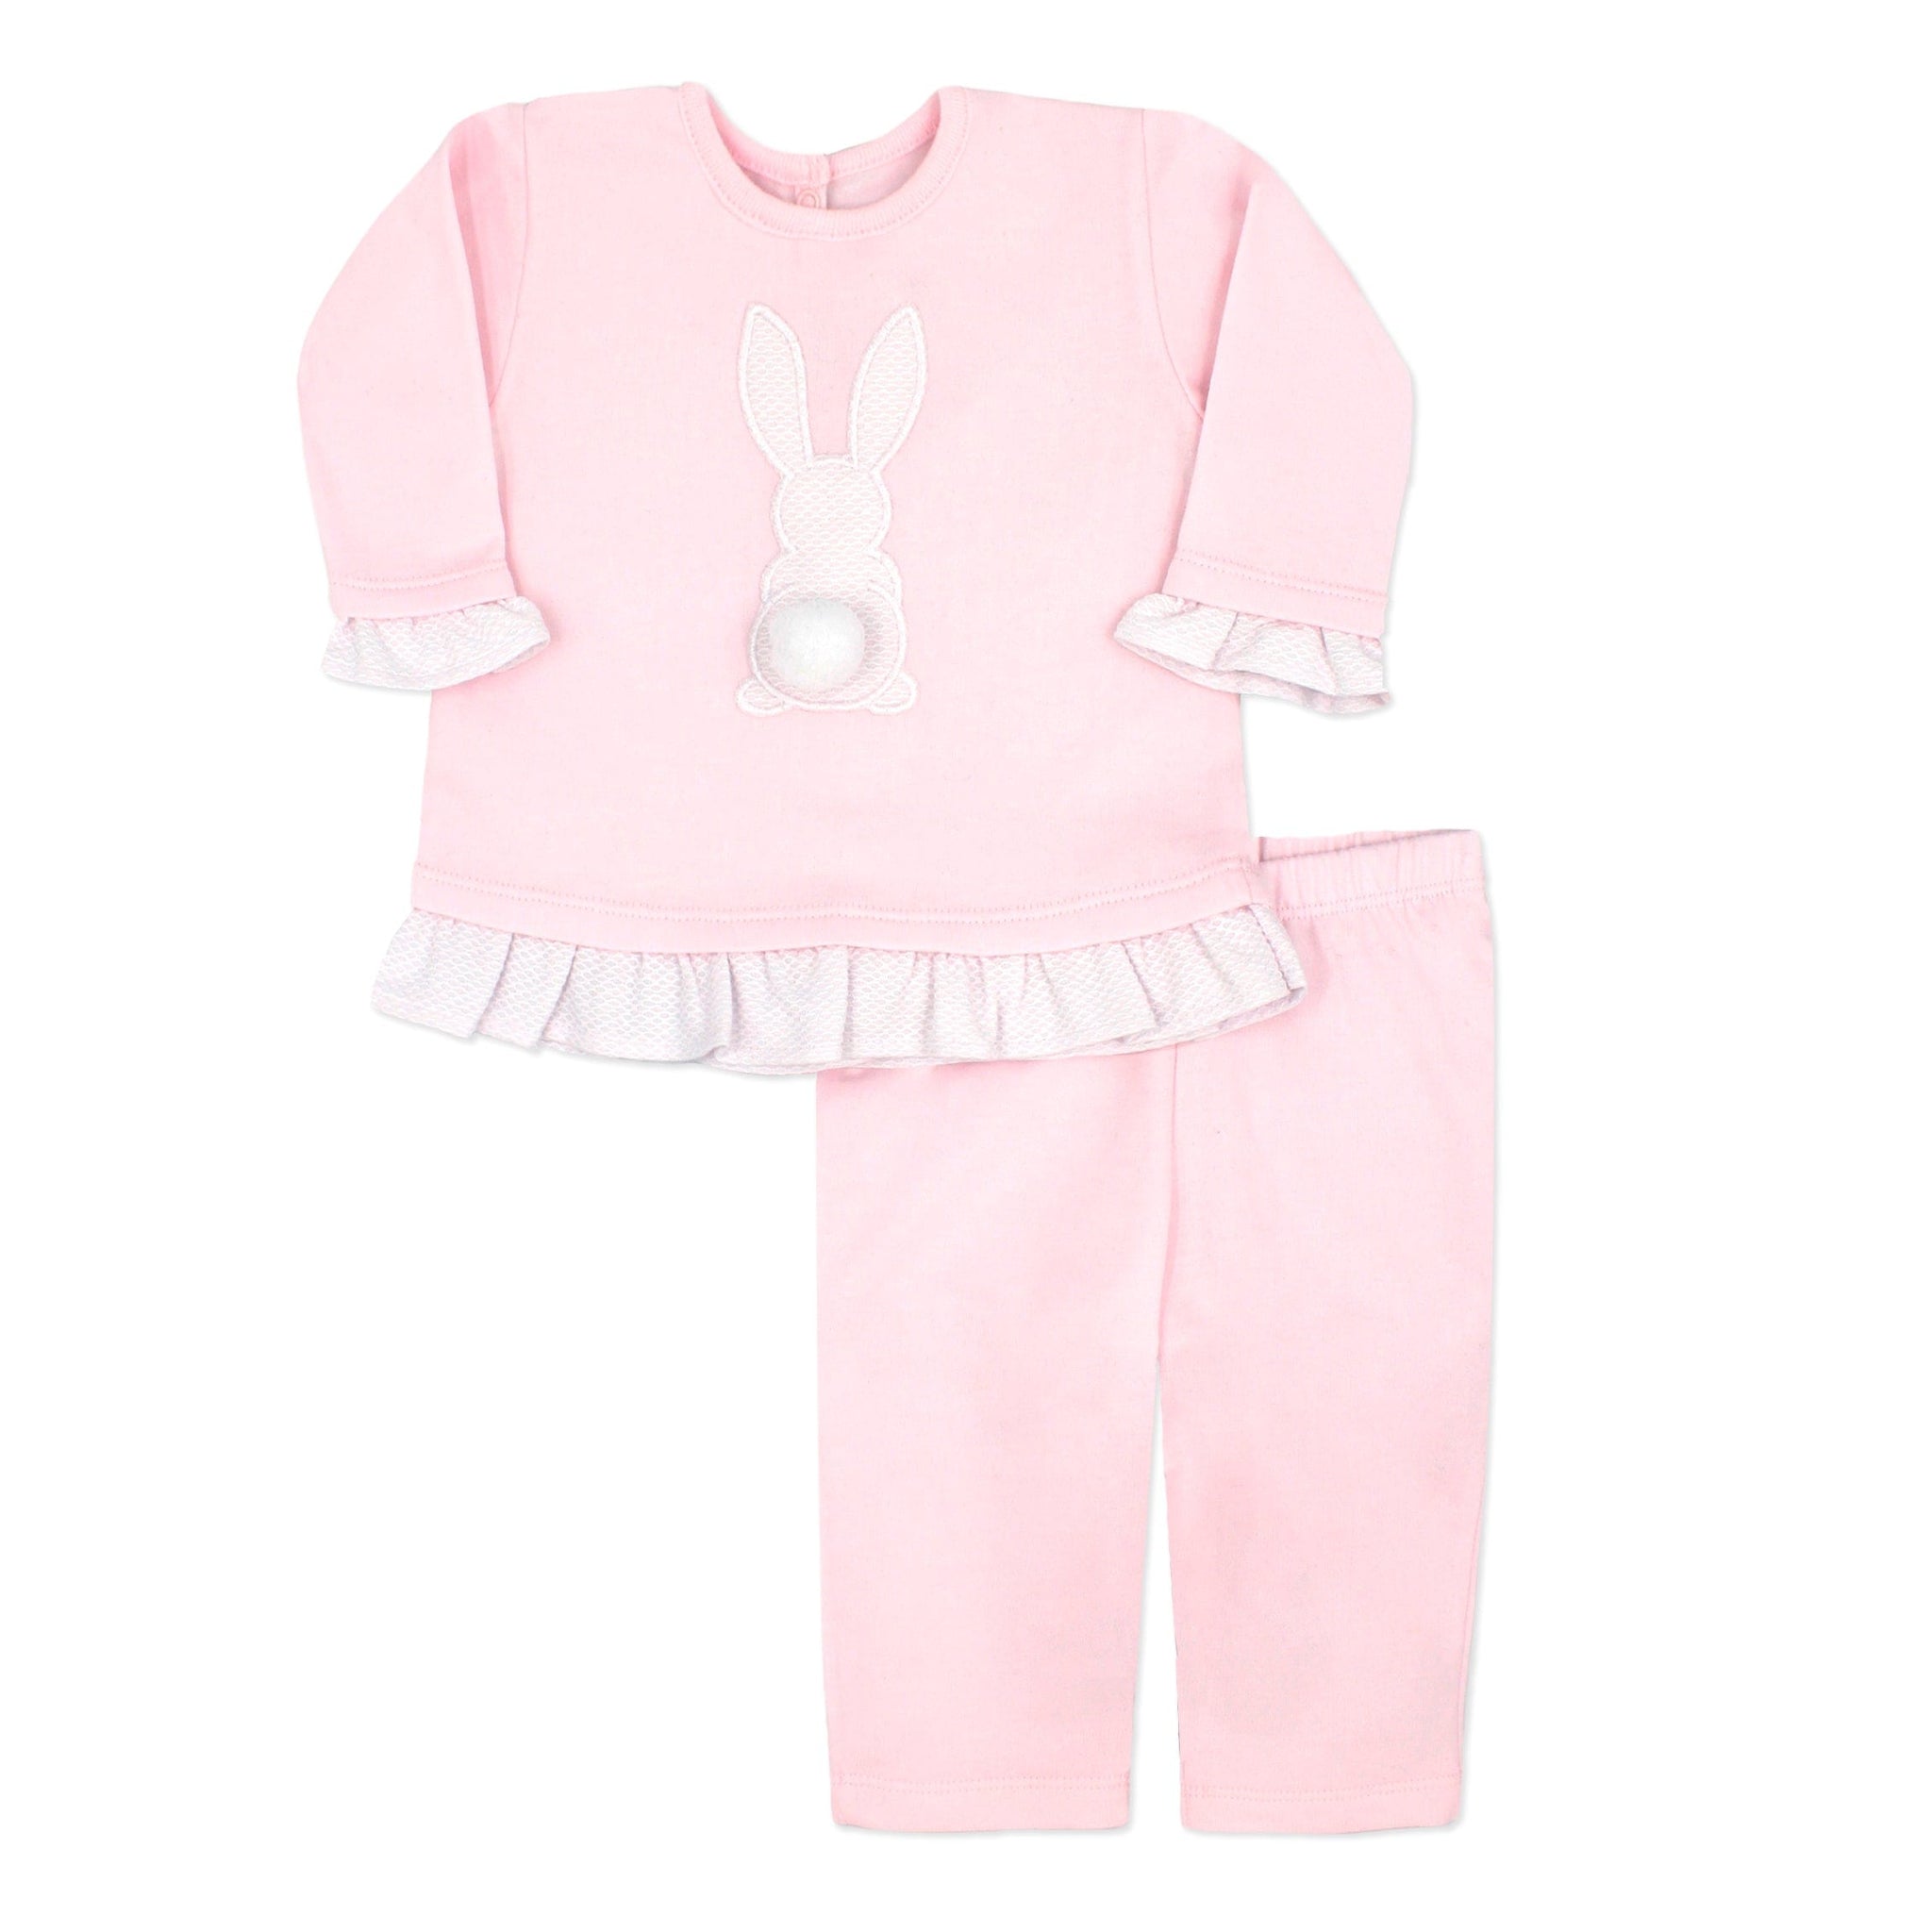 Rapife Top & Shorts 5381W23 Rapife Baby Girls Pink Tracksuit